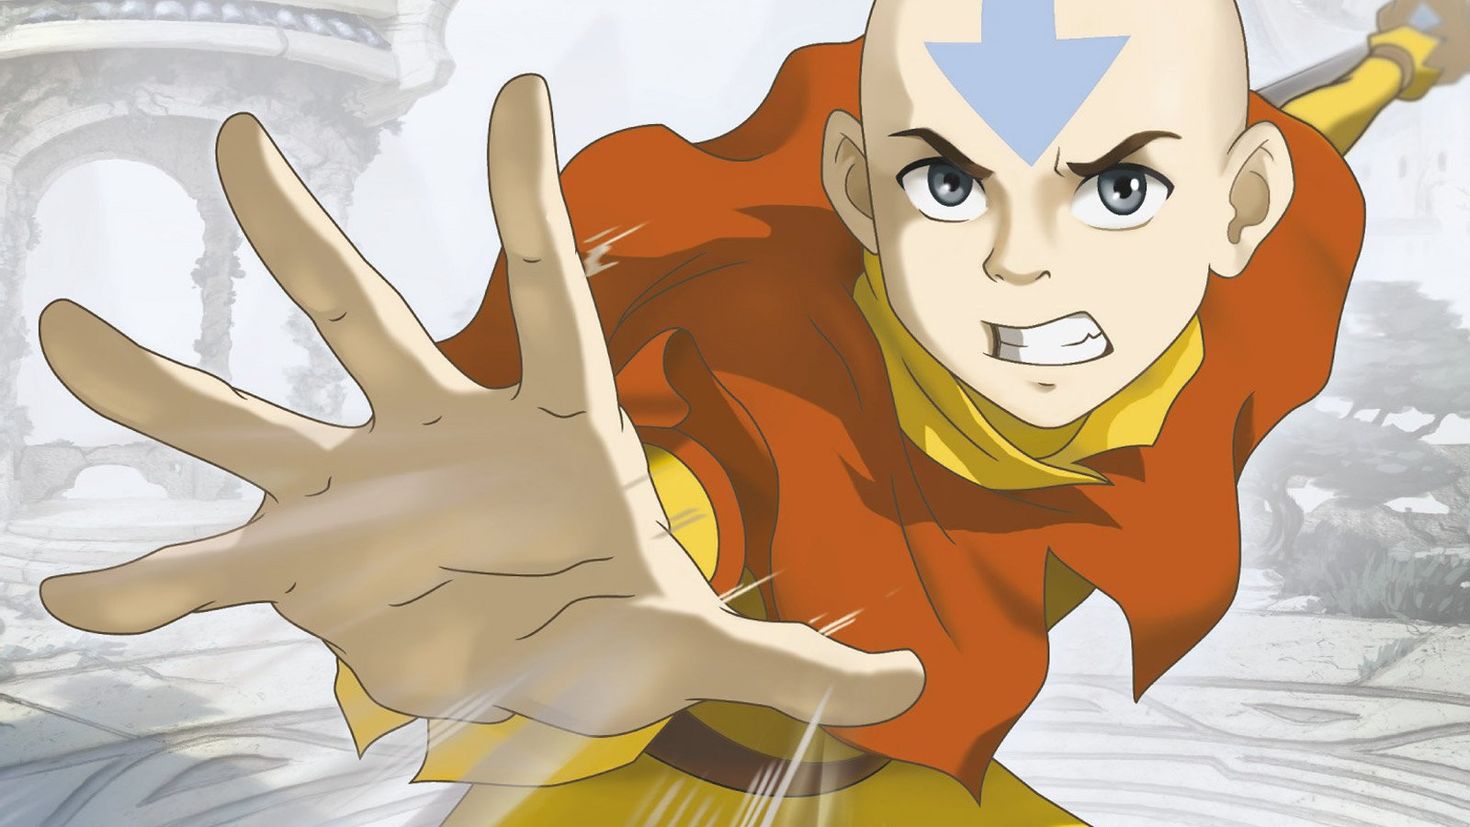 Avatar ang 9. Аватар аанг. Avatar the last Airbender.